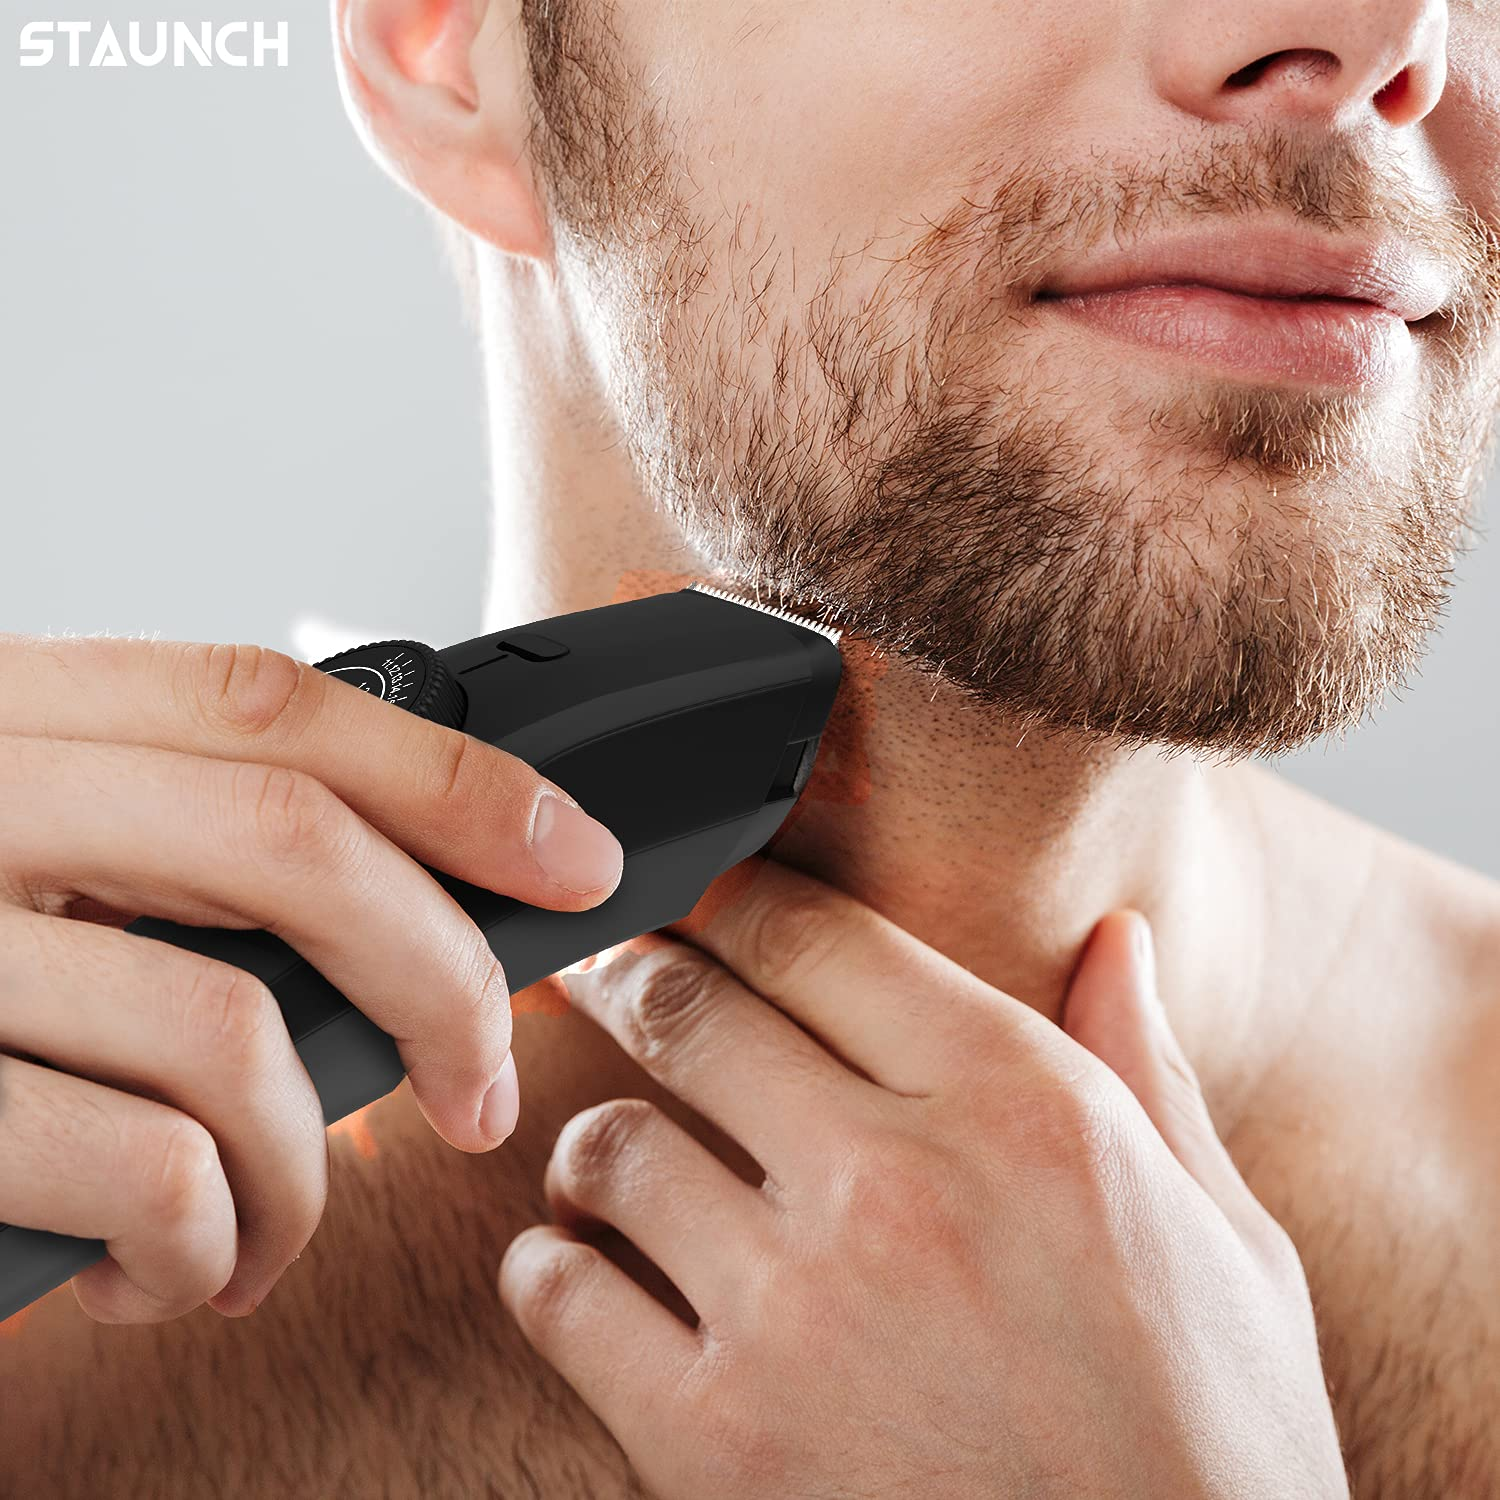 Staunch SBT1011 Rechargeable Cordless Beard Styling Trimmer for Men – 20 Length settings (Black)